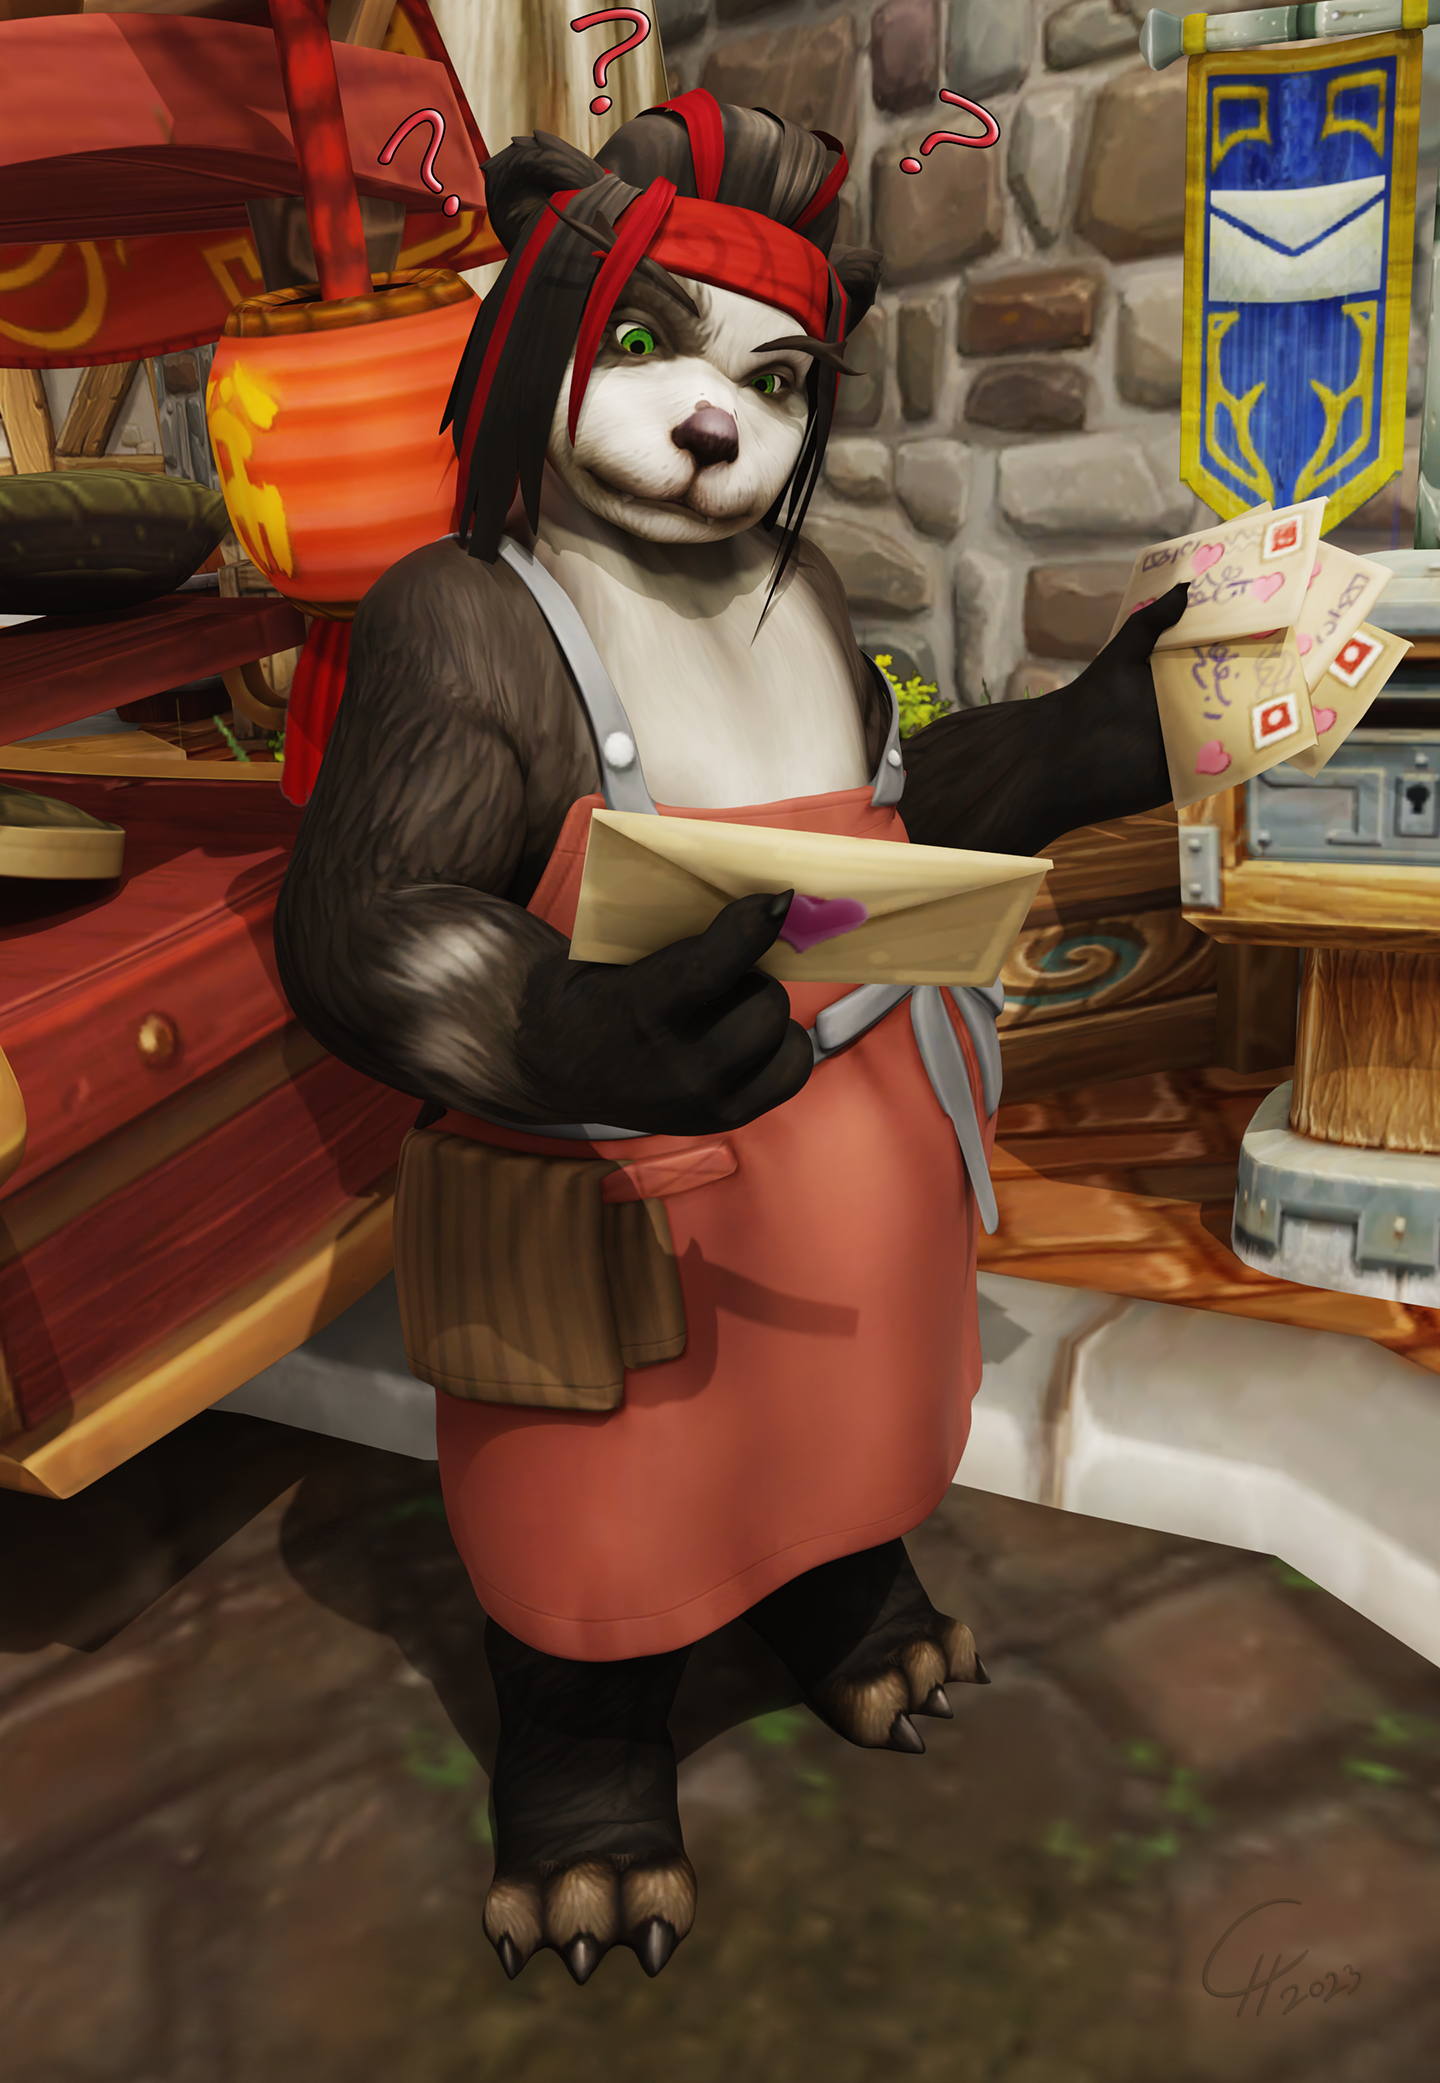 Pandarian Women's Day #5 [Pandaren/SFW]
While visiting Stormwind City to sell his
tasty noodles, Chunho recieves a handful
of letters directed to him and wishing a
wonderful Women's Day. This deeply confuses
the lad and makes him wonder if the locals
can tell the difference between female and
male Pandaren at all. Outrageous!

[b][url=http://bakaras.com/murlocish/albums/userpics/10001/18/2023ChunhoPandarianWDayXL.png]==XL-Size Edit==[/url][/b]
Keywords: OC;Pandaren;SFW;girly